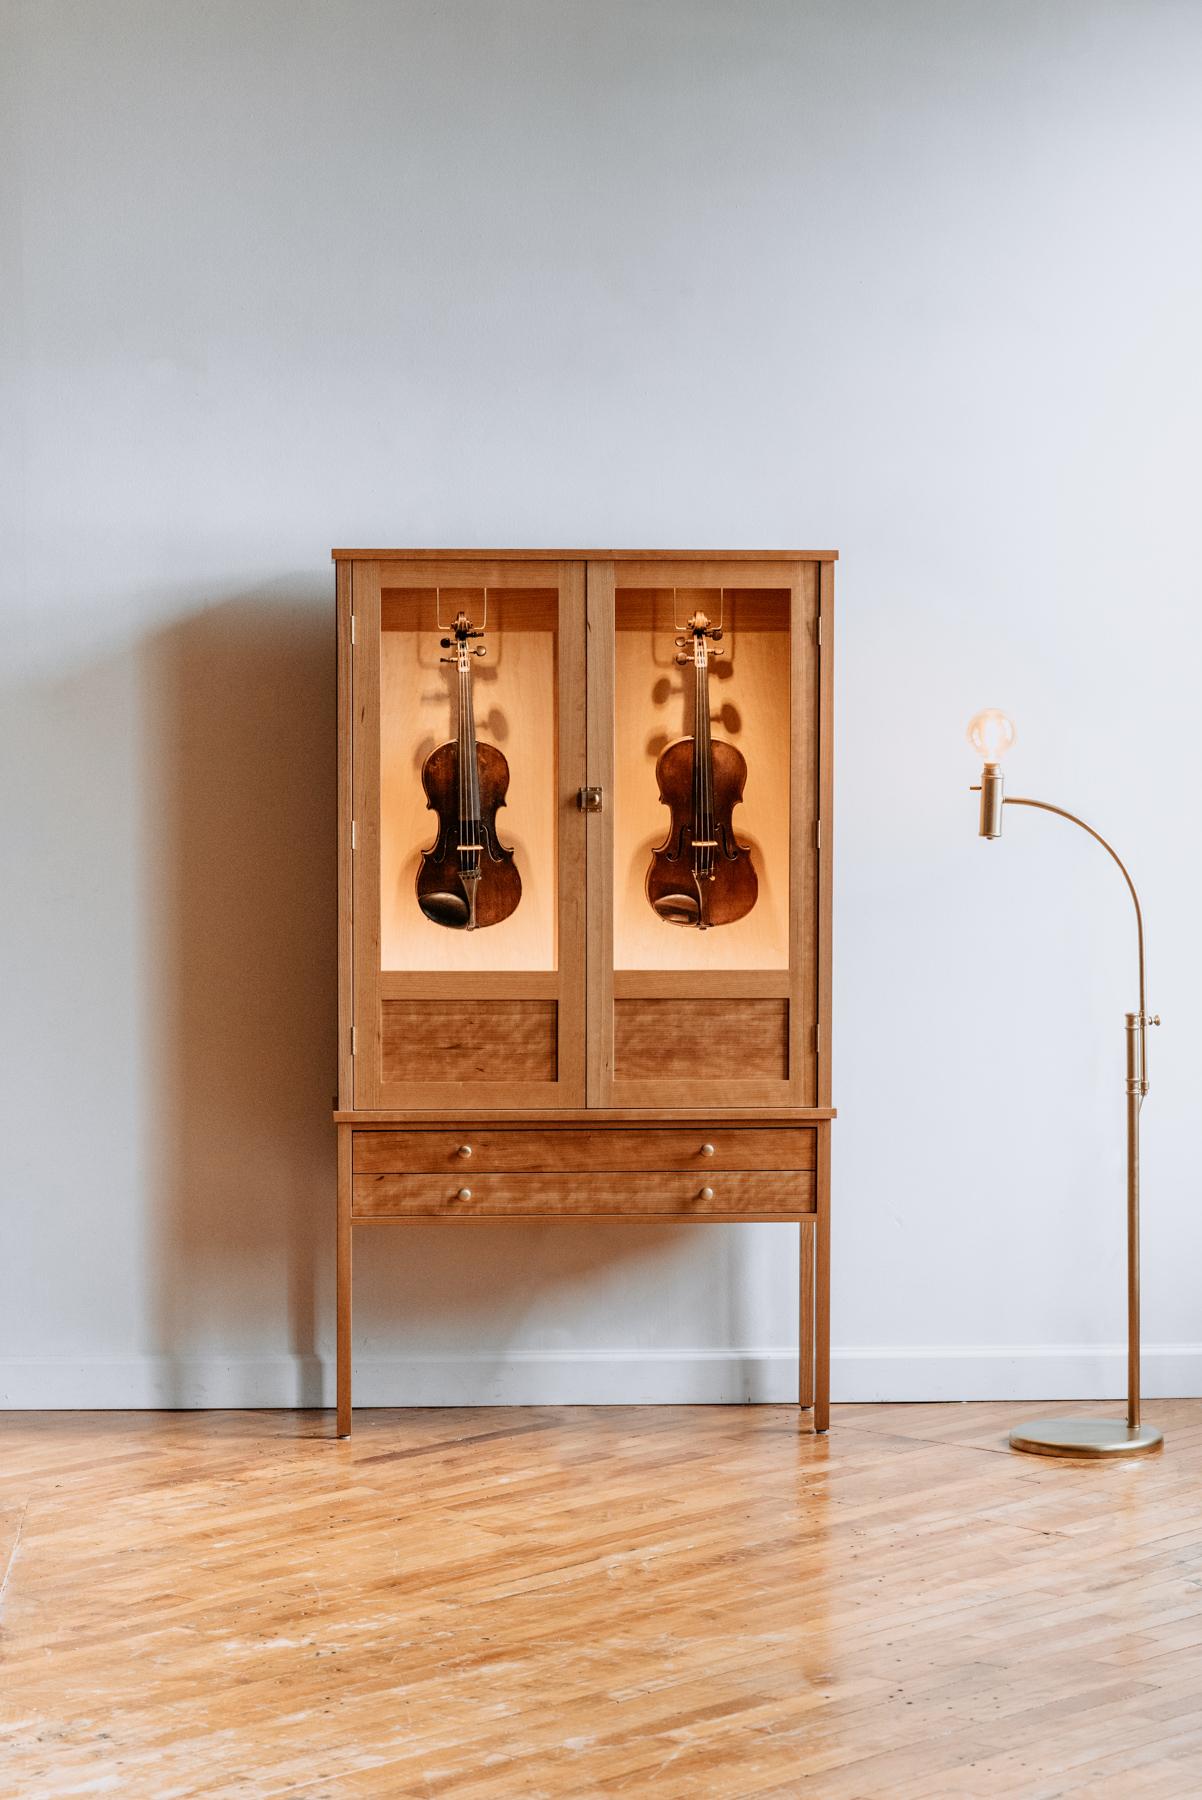 The Violin Habitat is a freestanding humidity-controlled cabinet for elegantly displaying and protecting your violins. This Habitat will comfortably store & display two violins behind double doors, adorned with brass hardware accents.

Completely